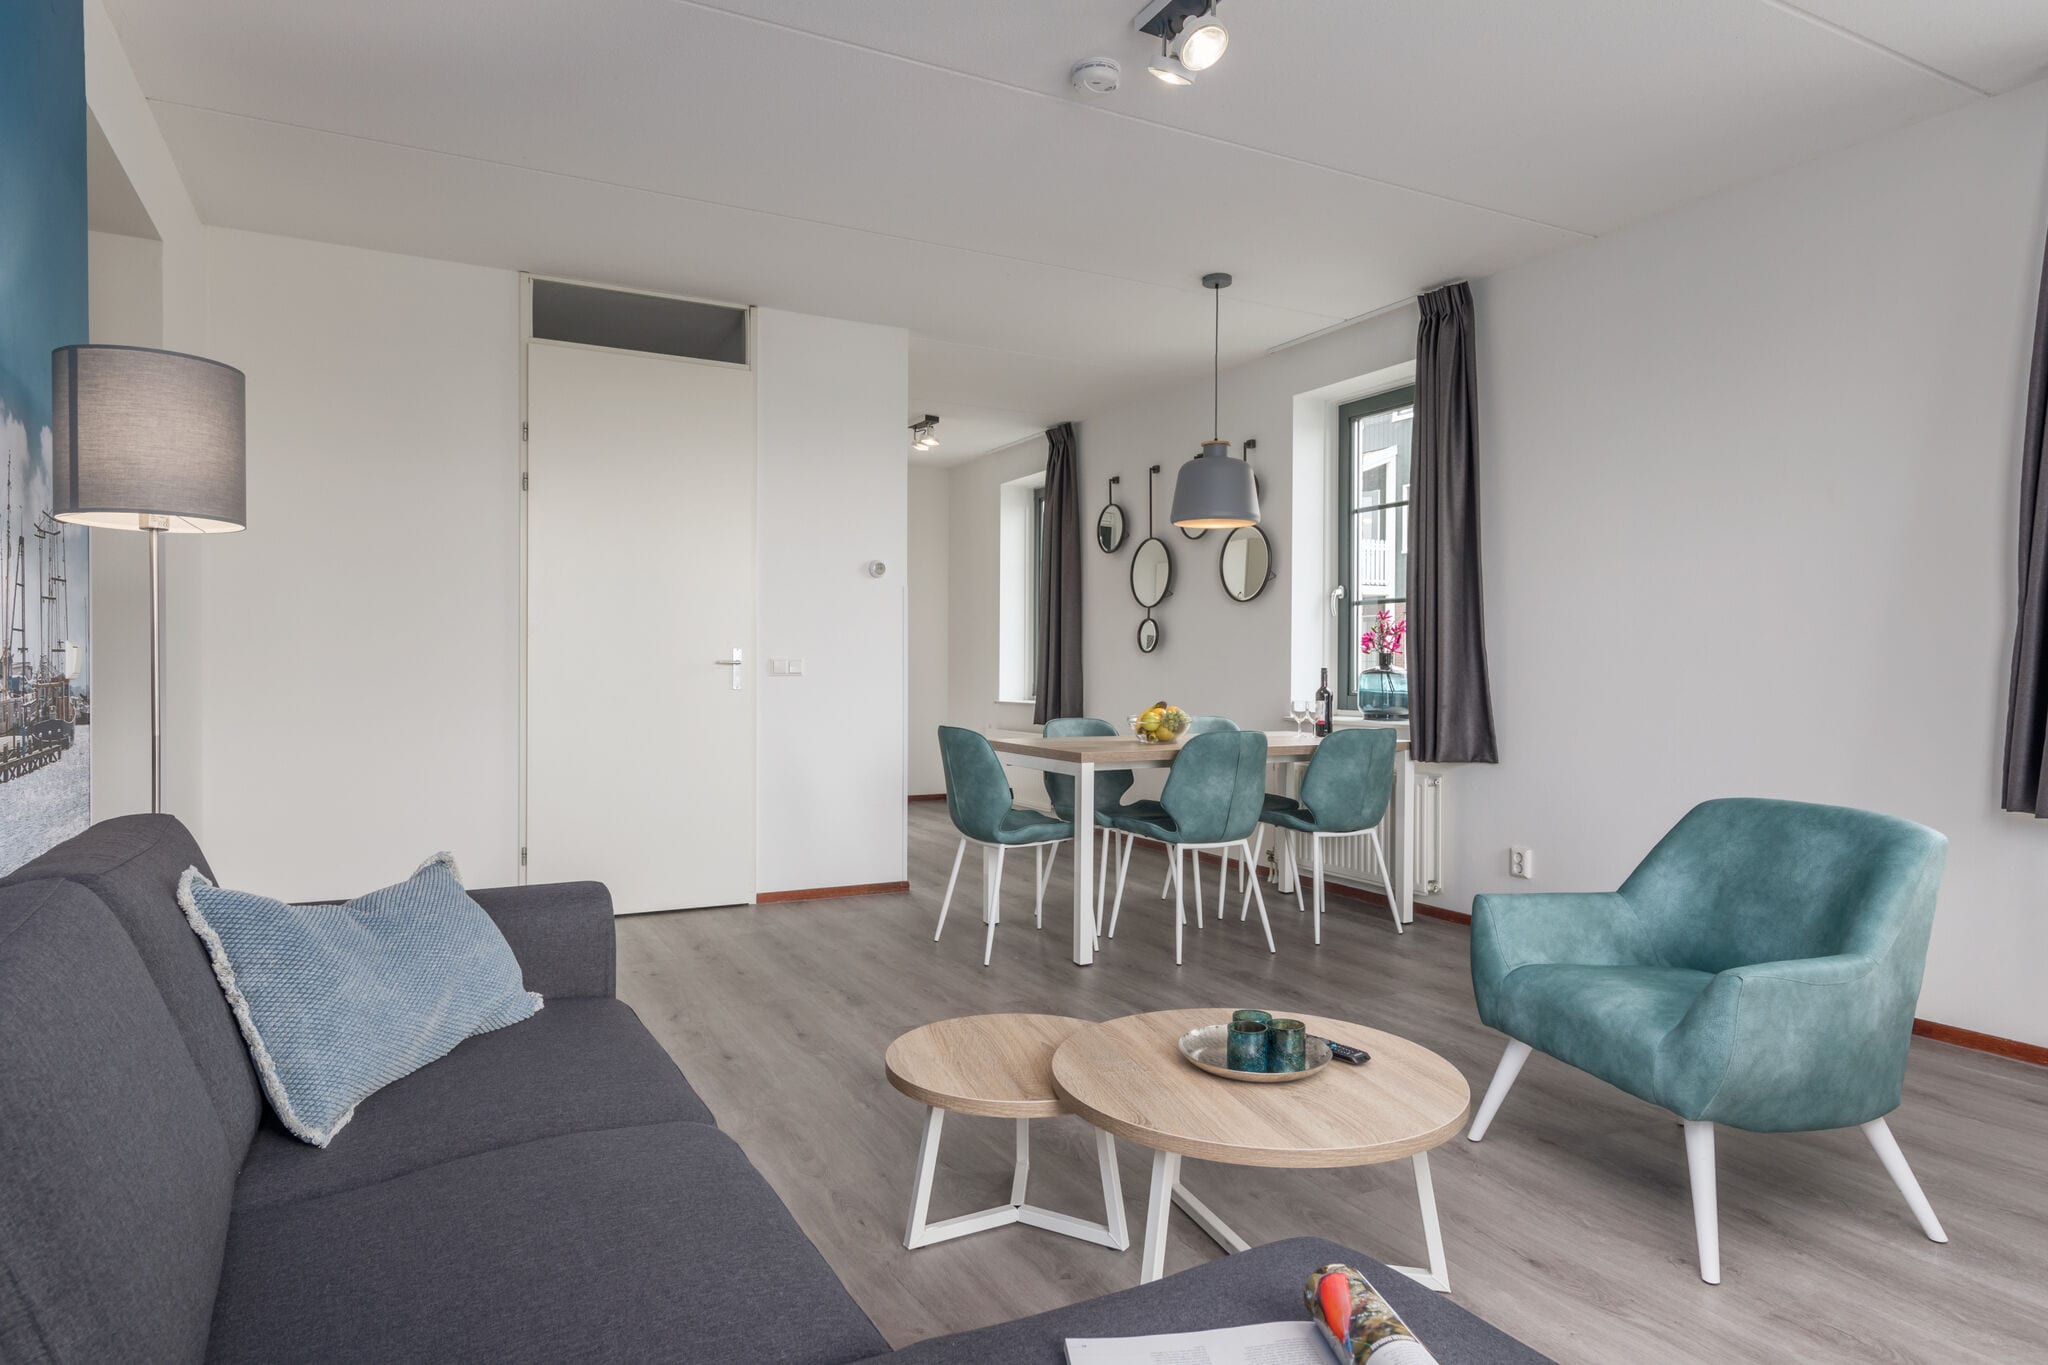 Restyled apartment on the Markermeer